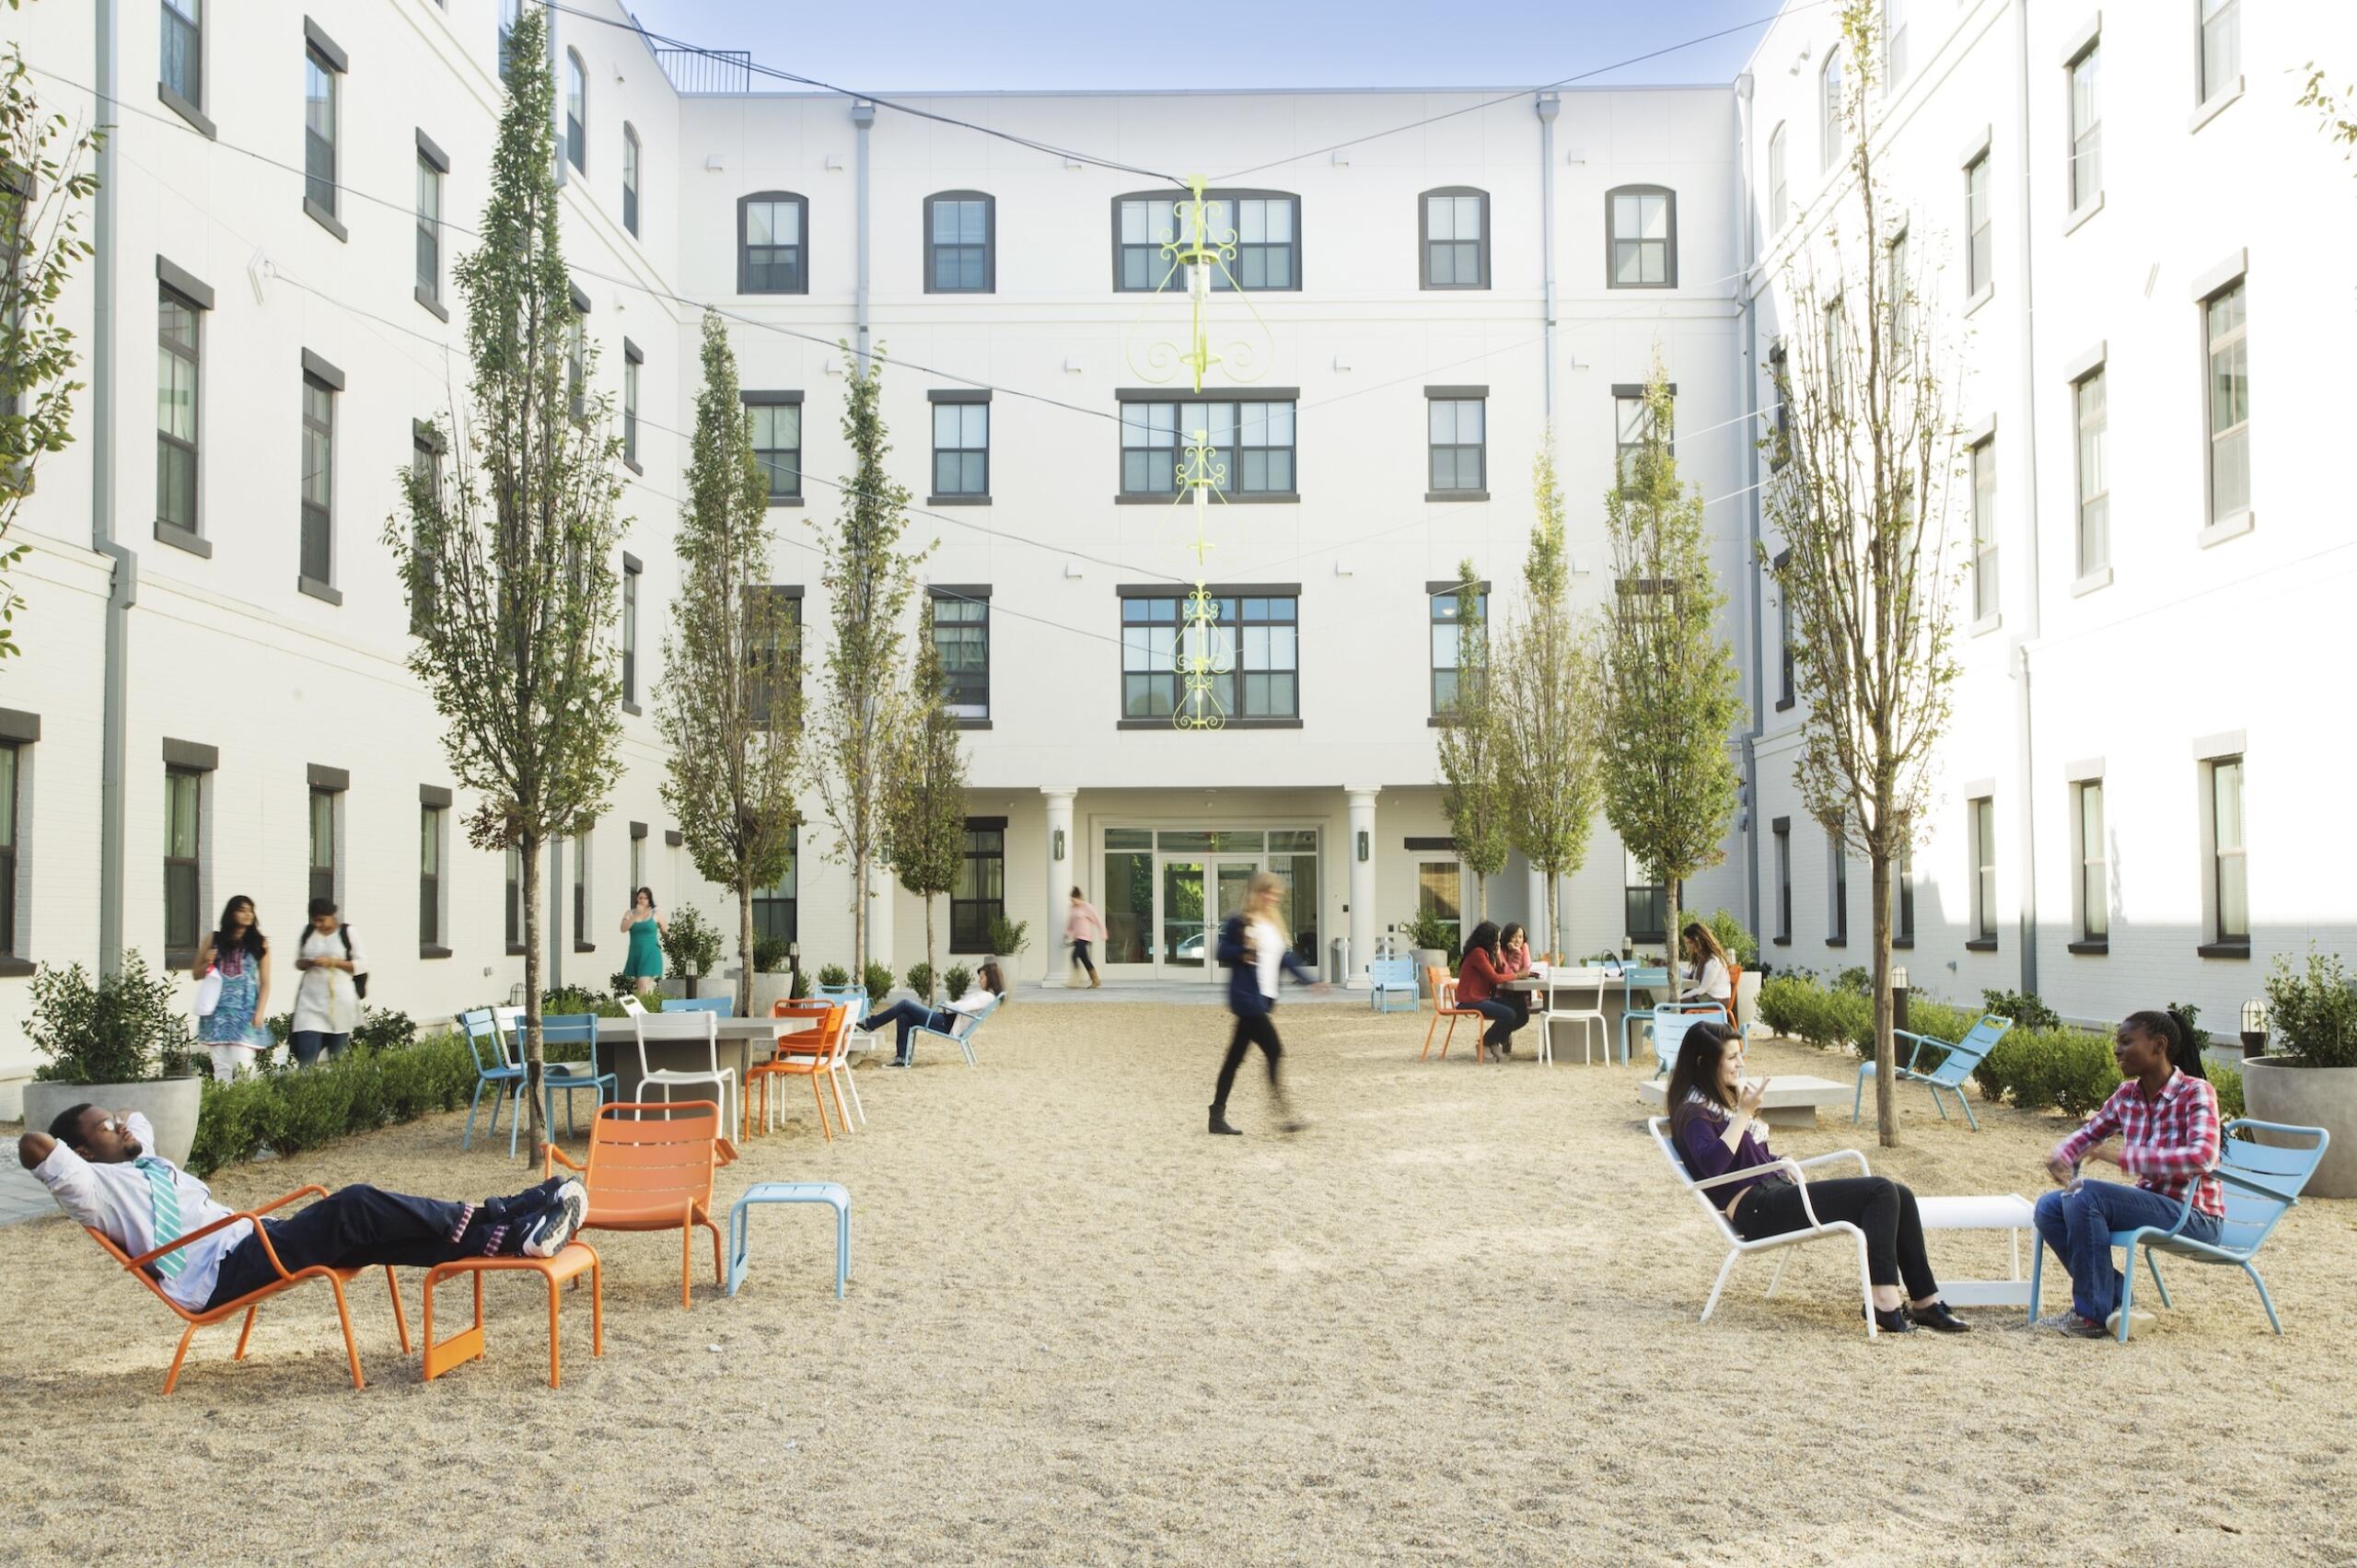 One West Victory courtyard with people seated in chairs in the sand